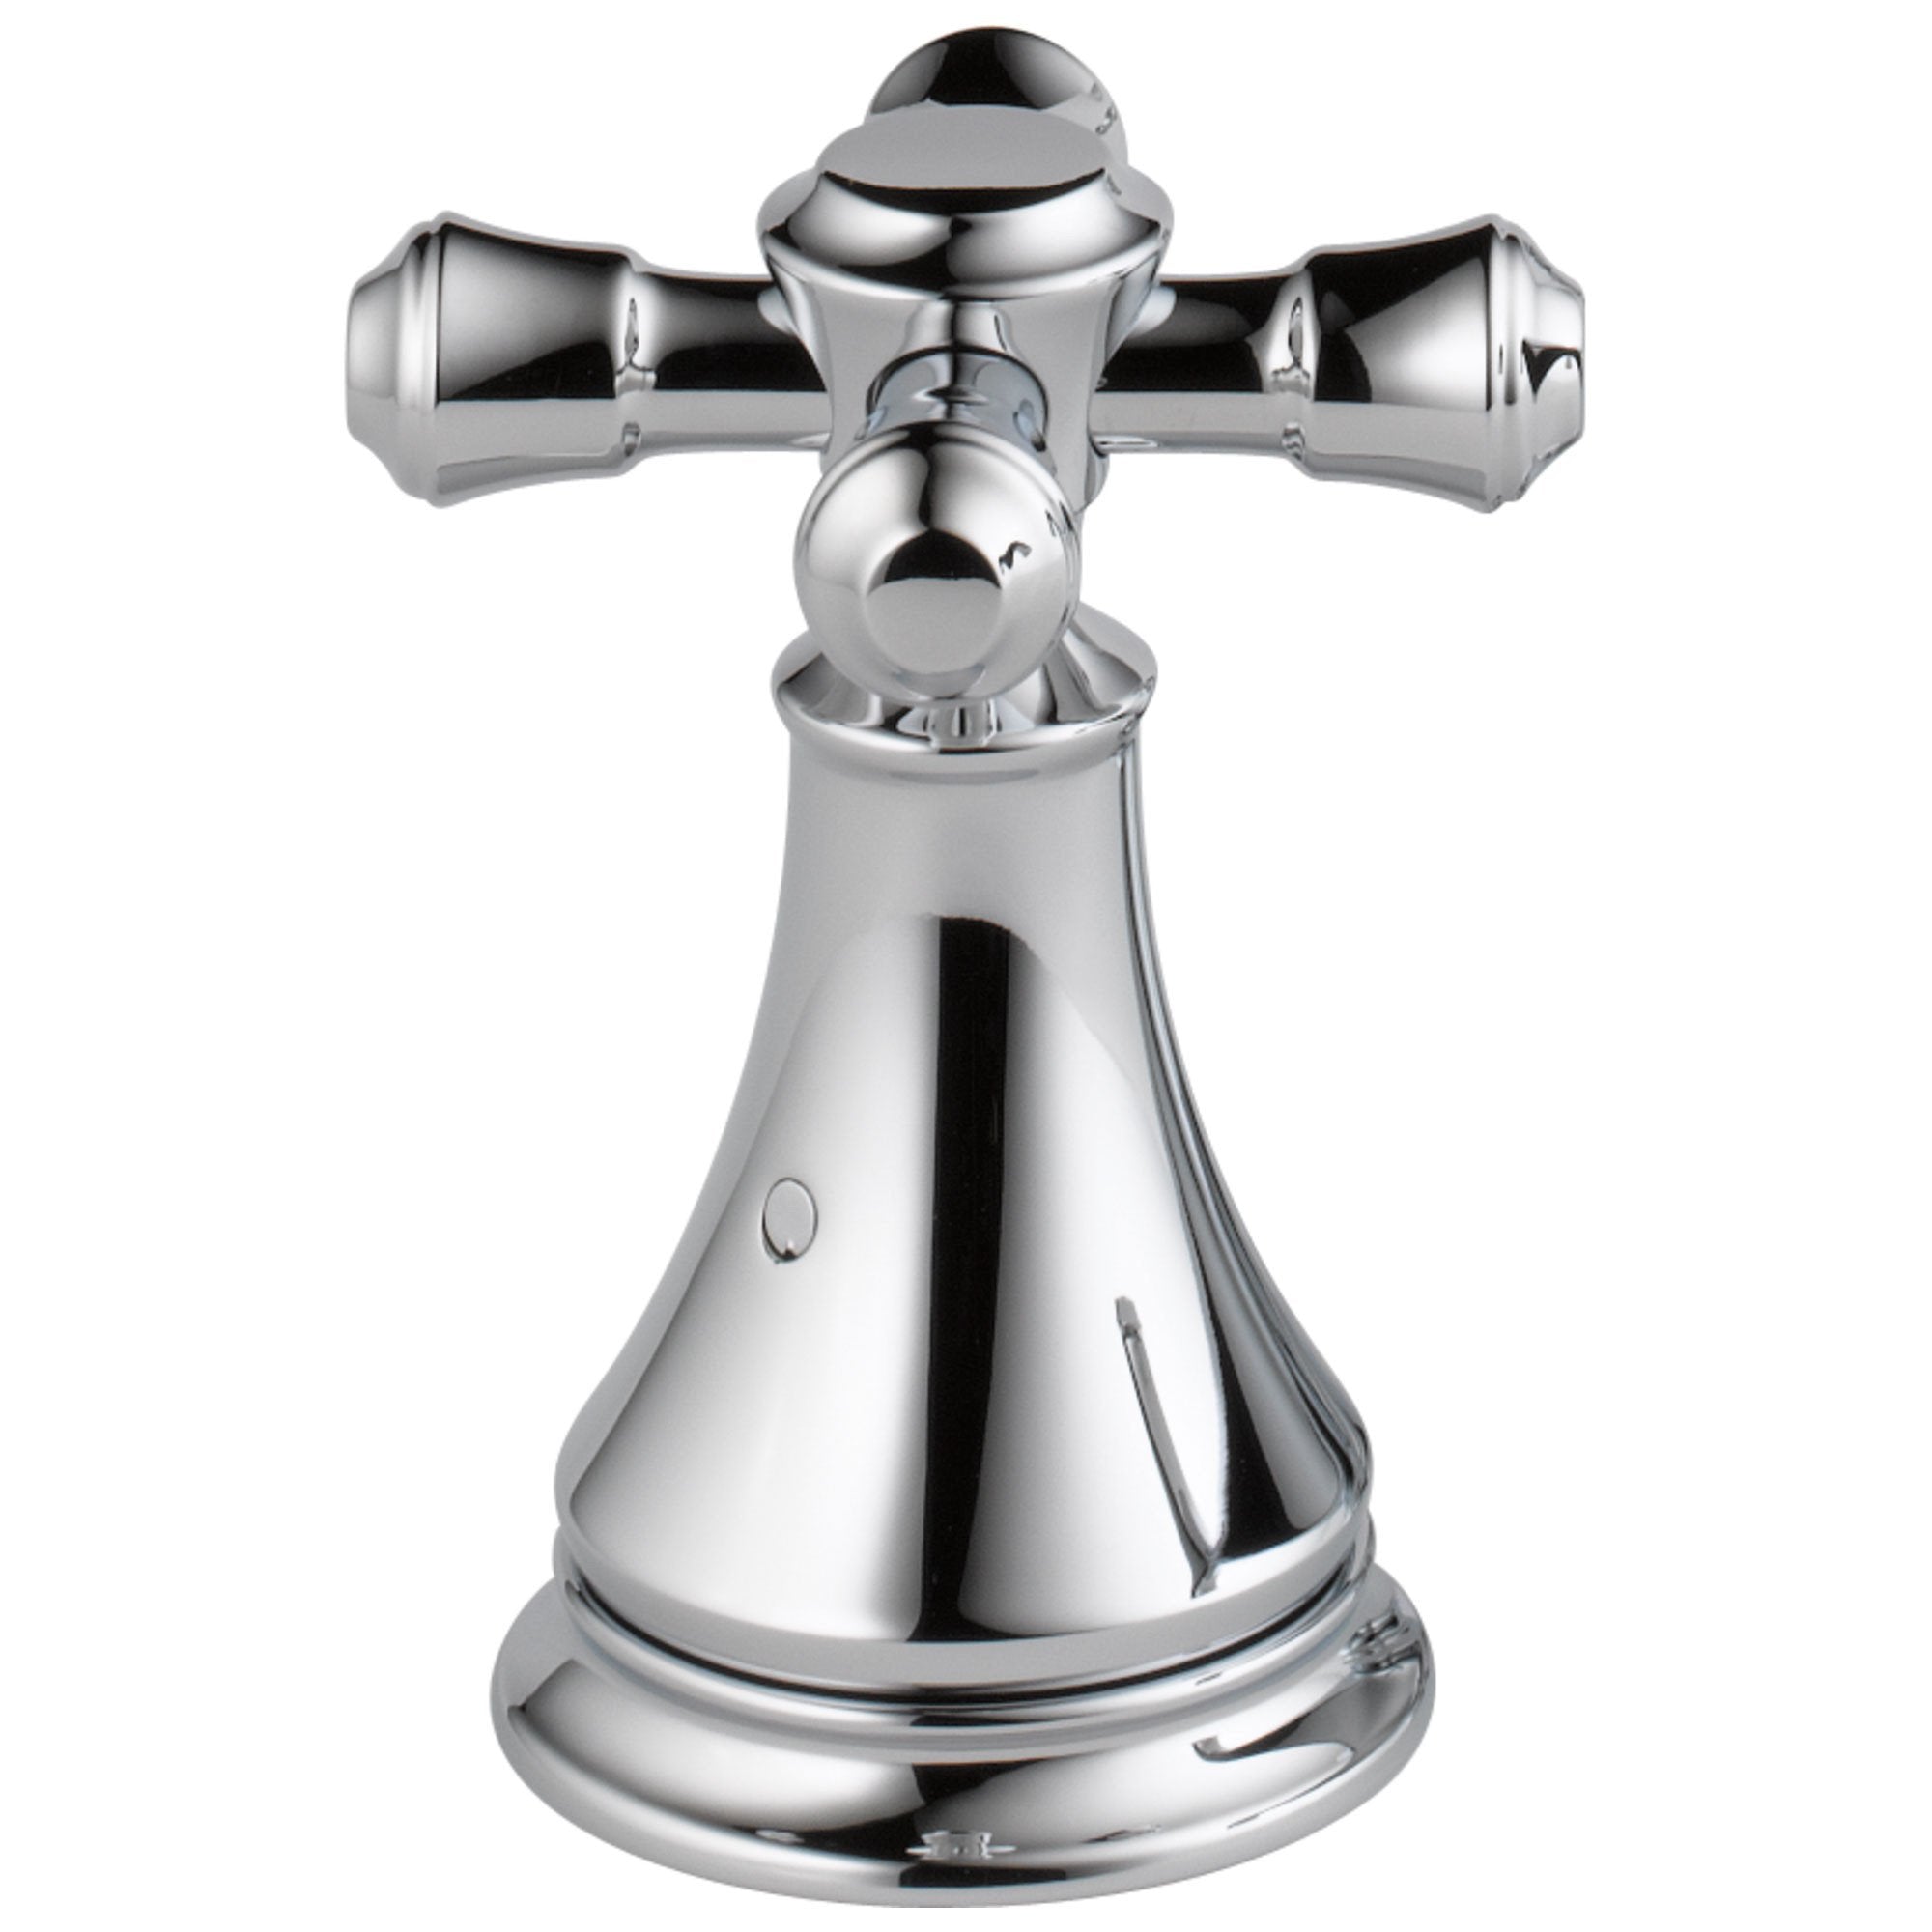 Delta Cassidy Collection Chrome Finish Roman Tub Cross Handles - Quantity 2 Included 579642